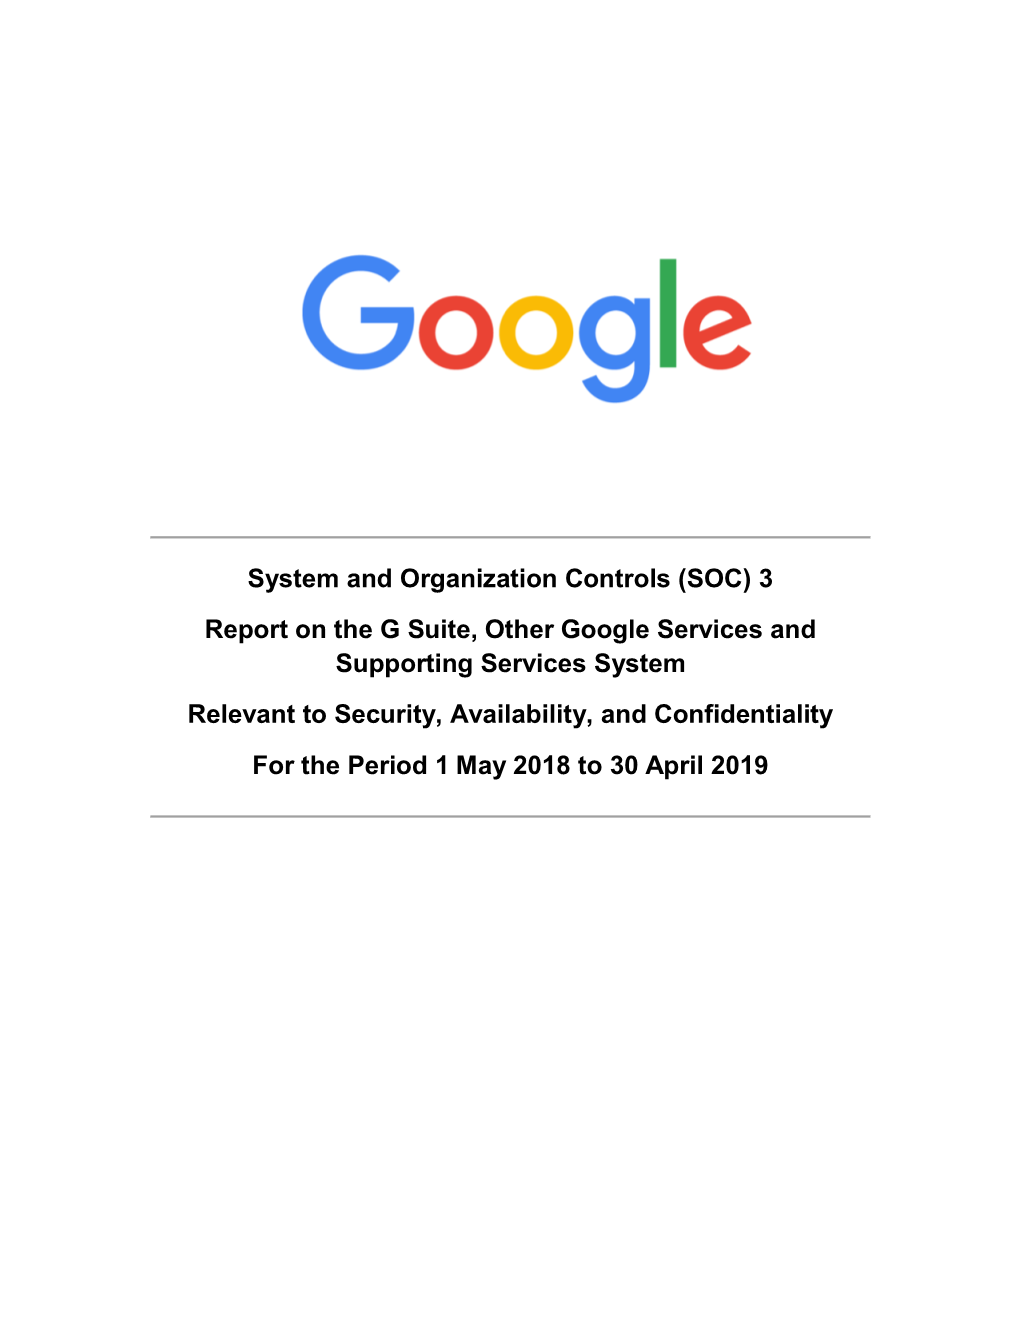 System and Organization Controls (SOC) 3 Report on the G Suite, Other Google Services and Supporting Services System Relevant T